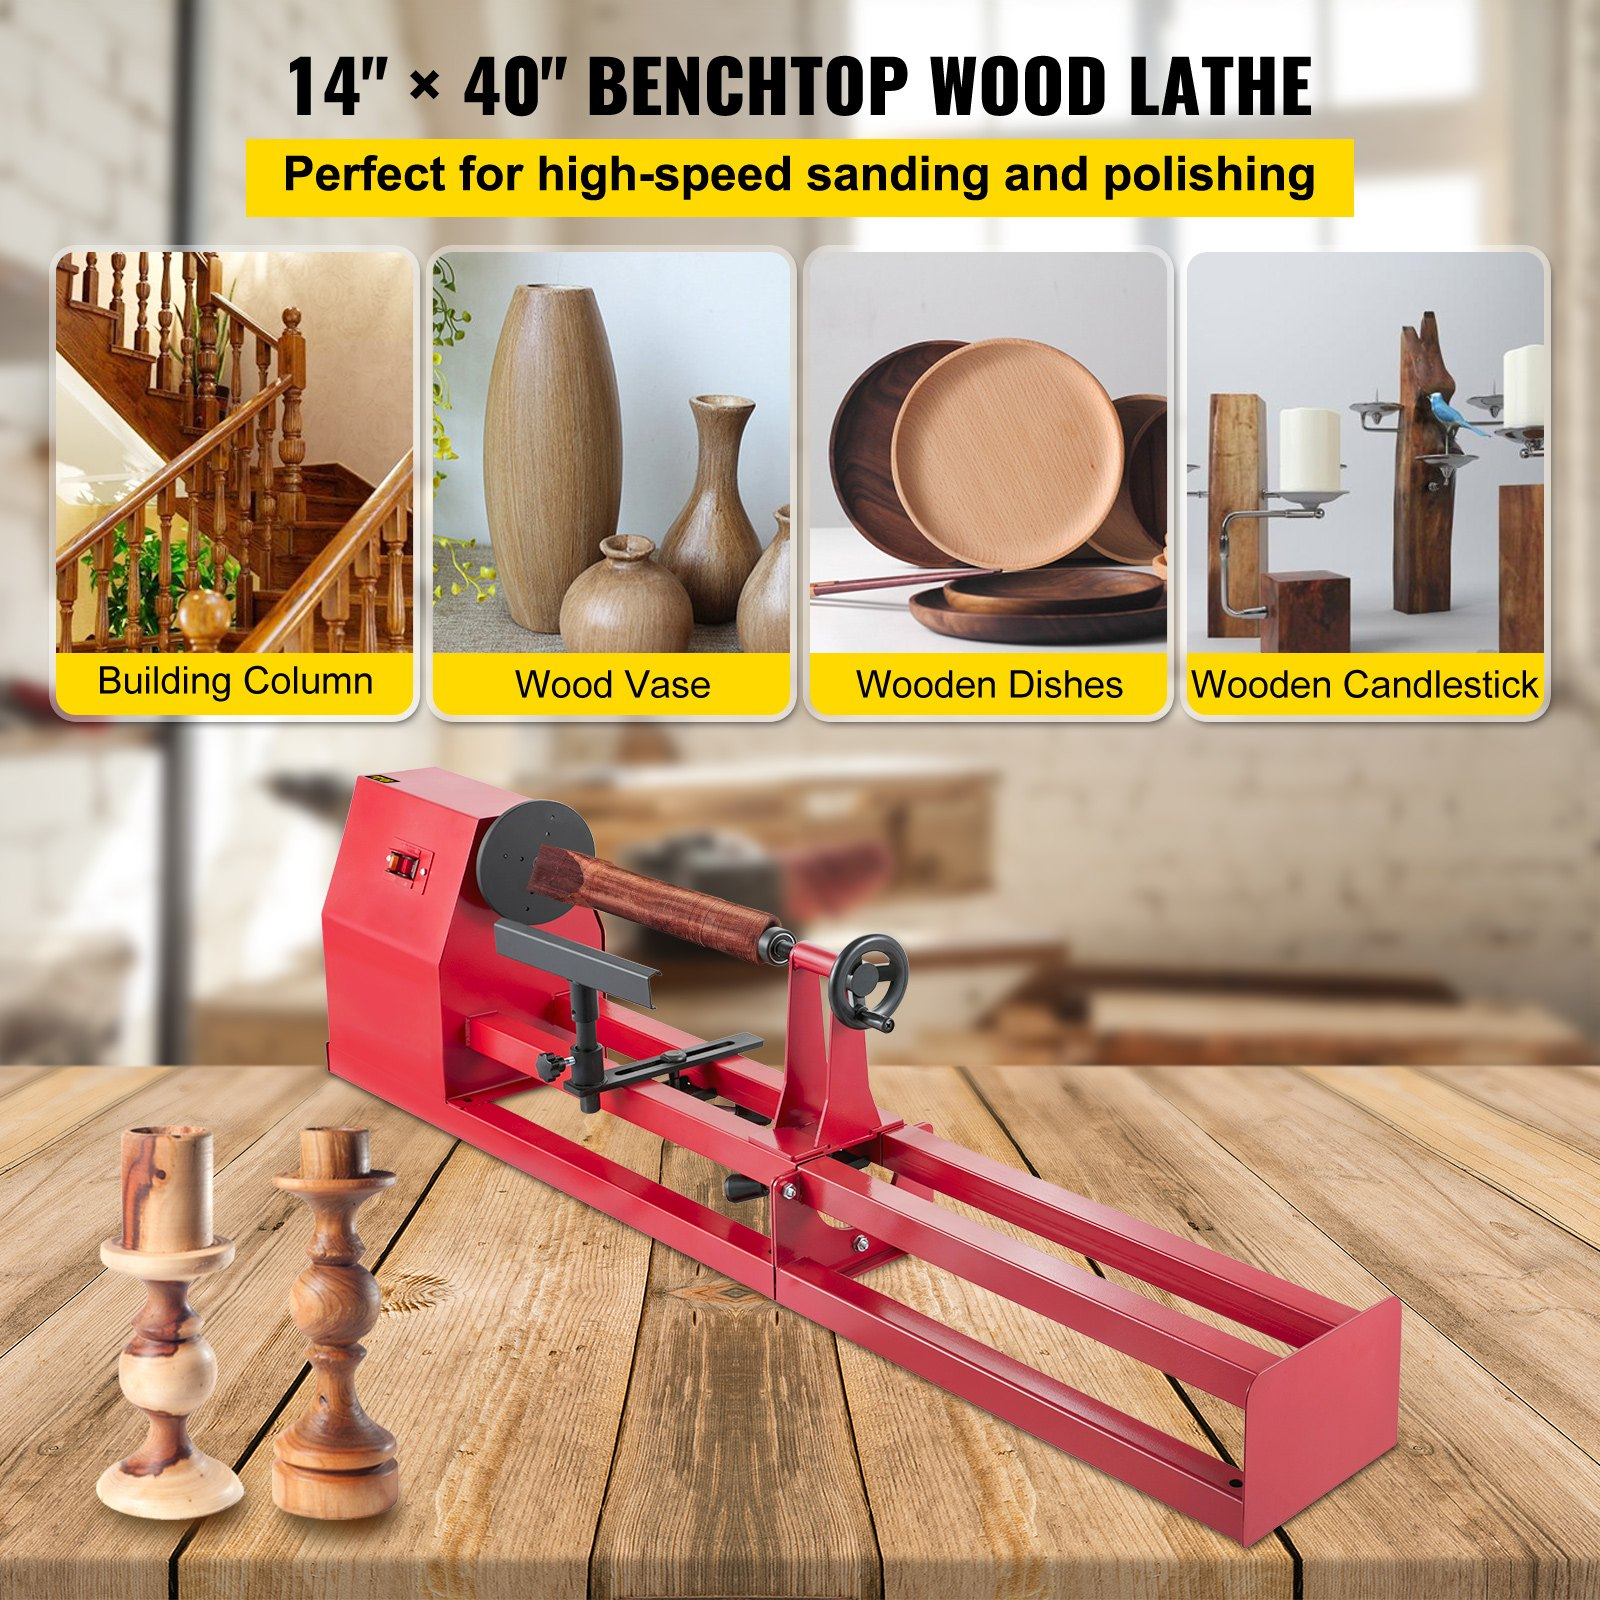 VEVOR Wood Lathe, 14" x 40", Power Wood Turning Lathe 1/2HP 4 Speed 1100/1600/2300/3400RPM, Benchtop Wood Lathe with 3 Chisels Perfect for High Speed Sanding and Polishing of Finished Work, Goodies N Stuff